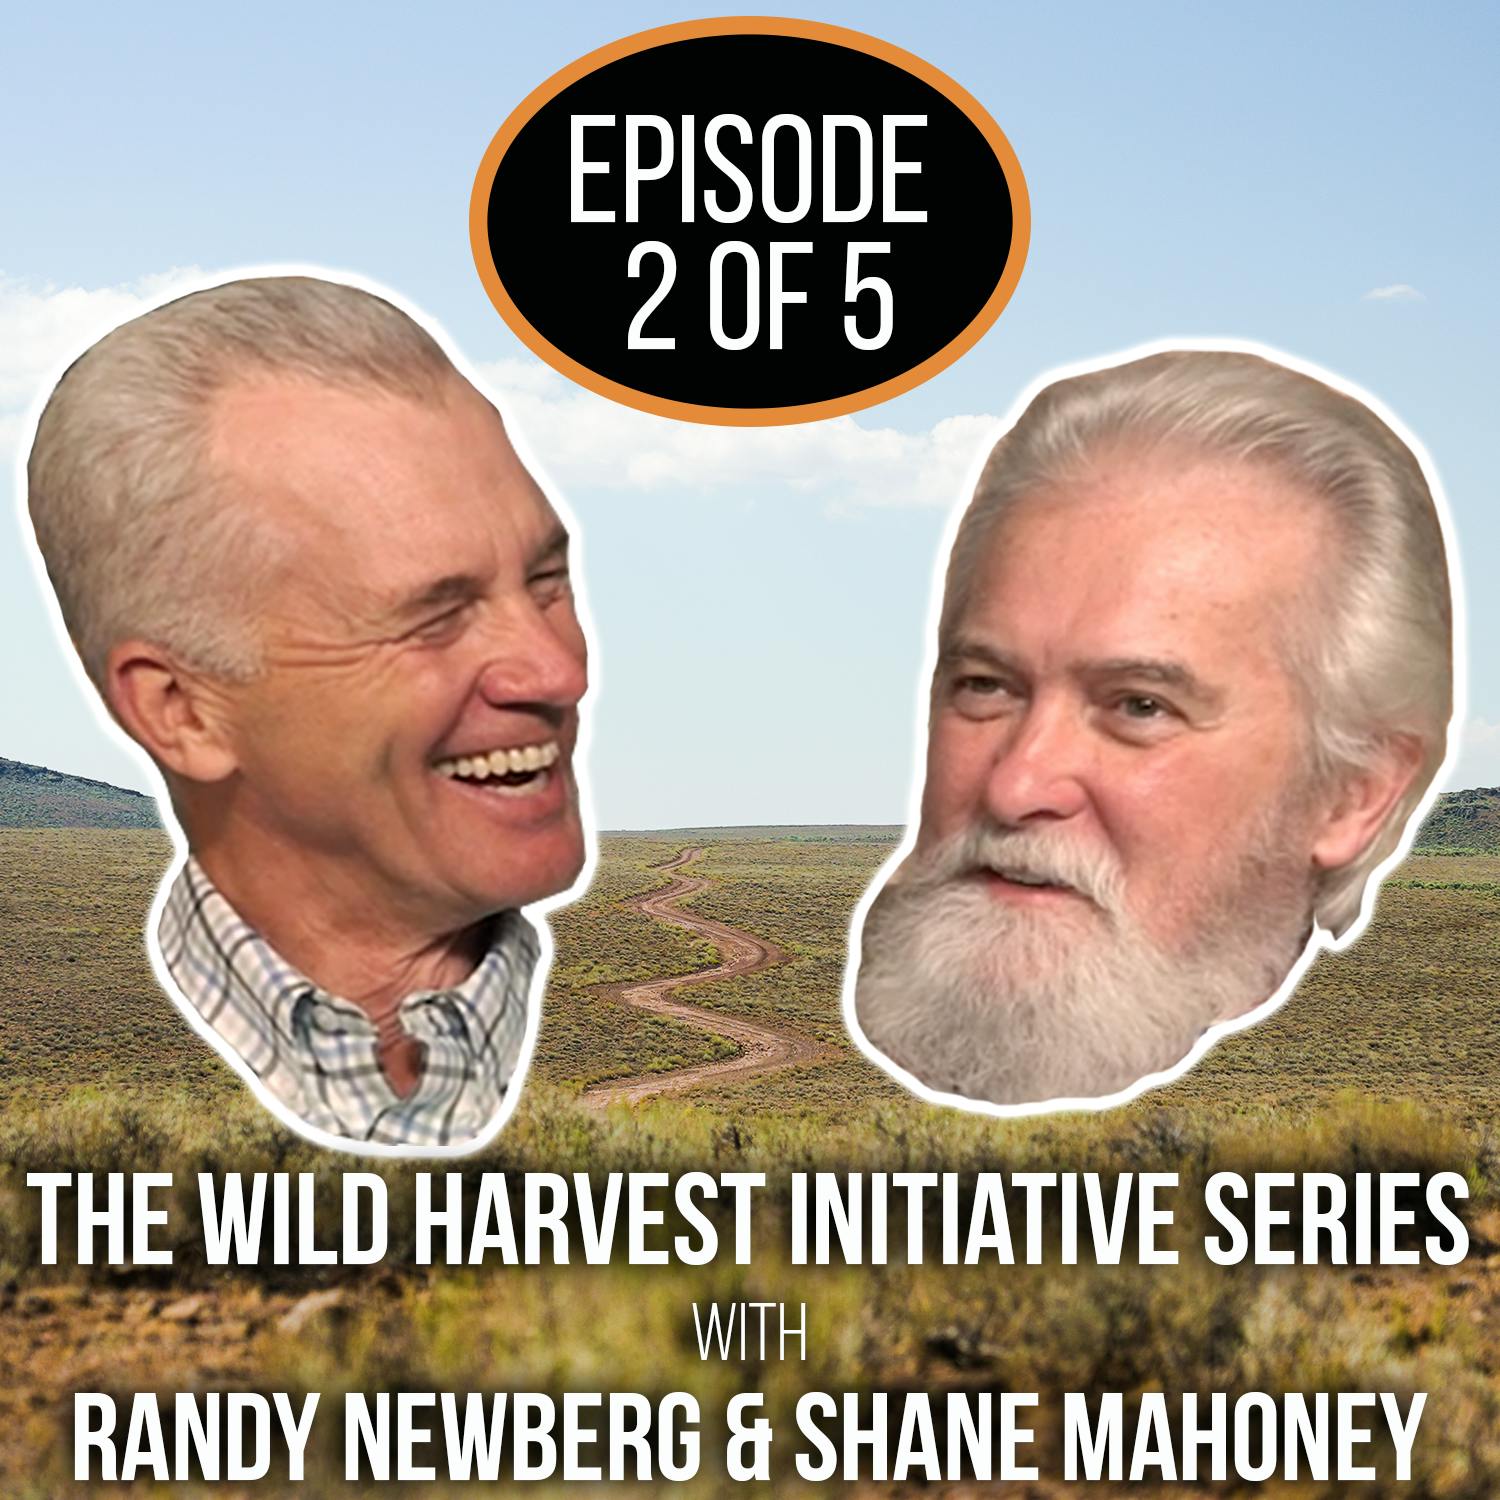 Shane Mahoney and the Wild Harvest Initiative, Part 2 of 5